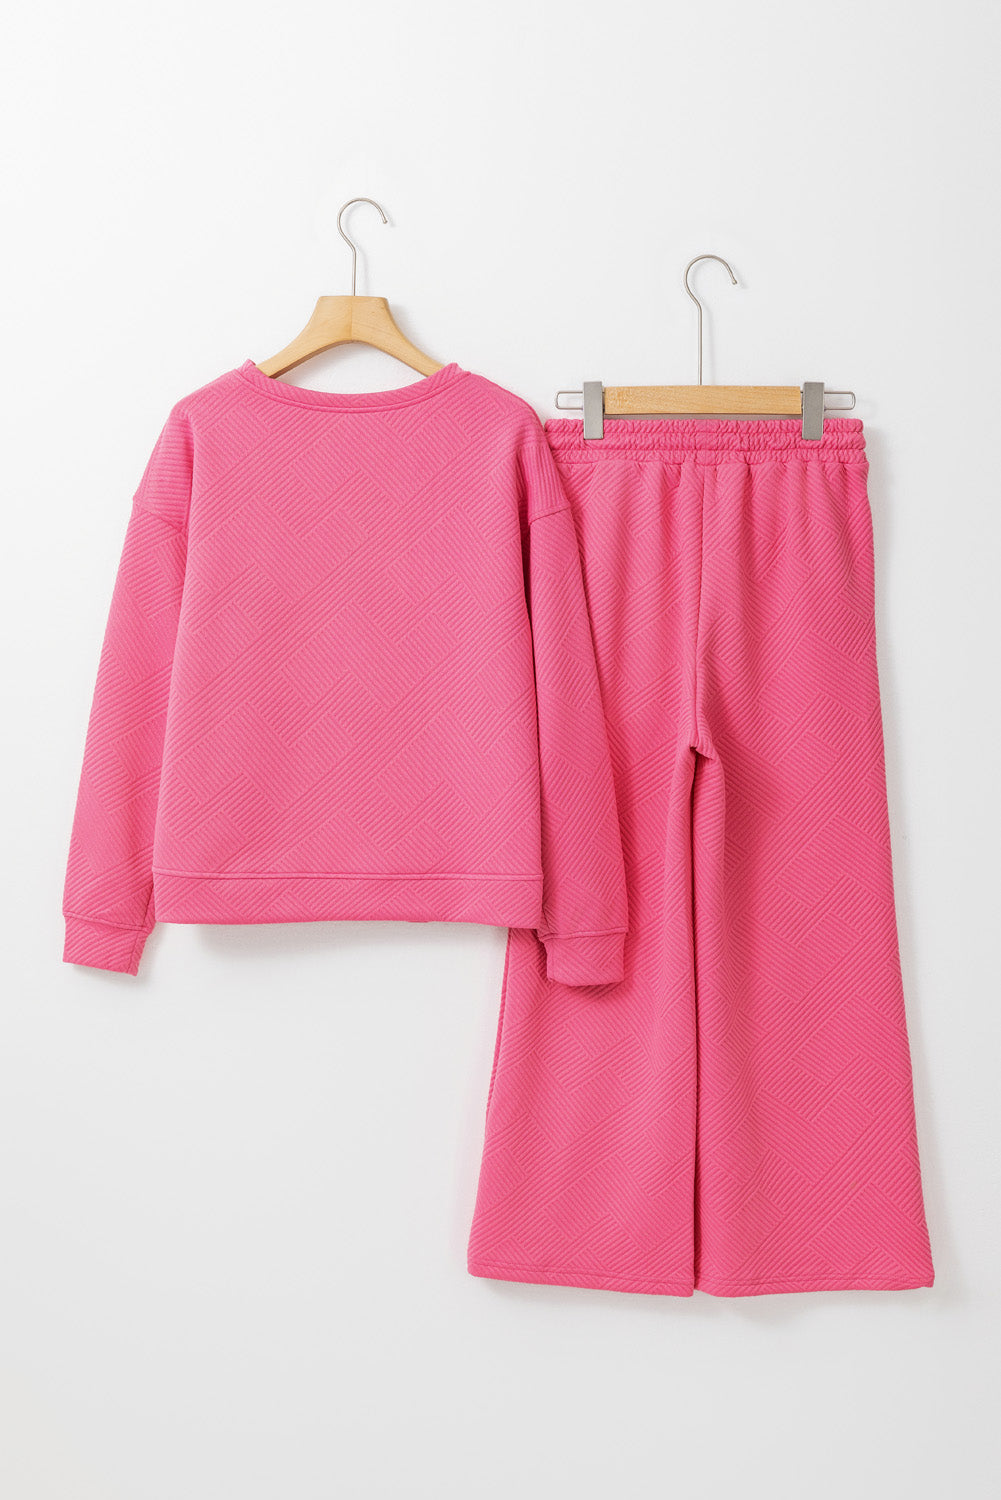 Strawberry Pink Ultra Loose Textured 2pcs Slouchy Outfit